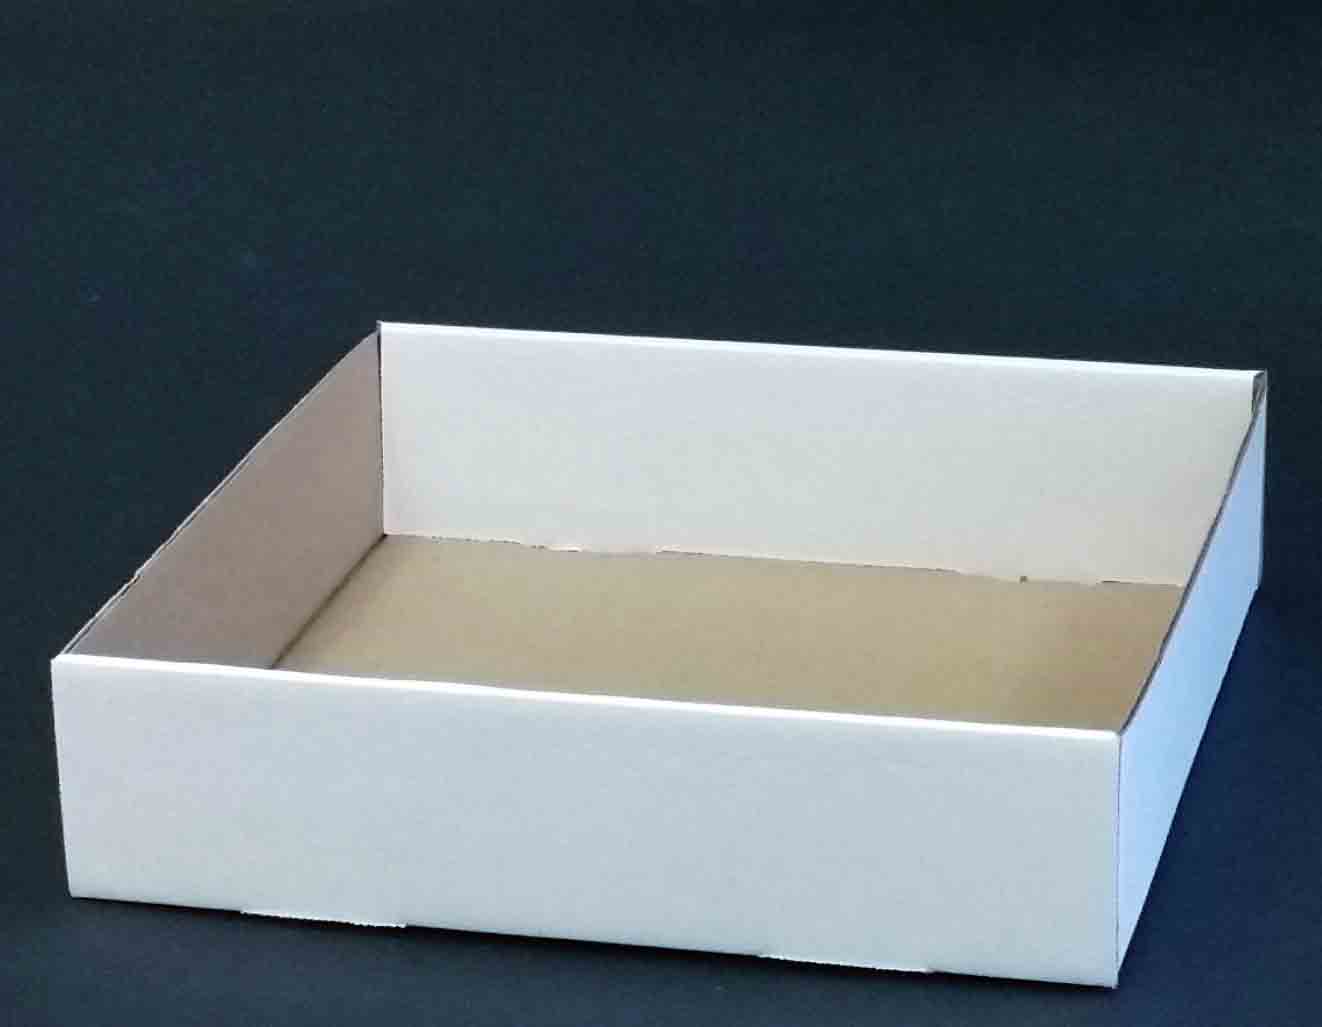 722 - 12 x 12 x 3" Delivery Tray - 57.40 bdle